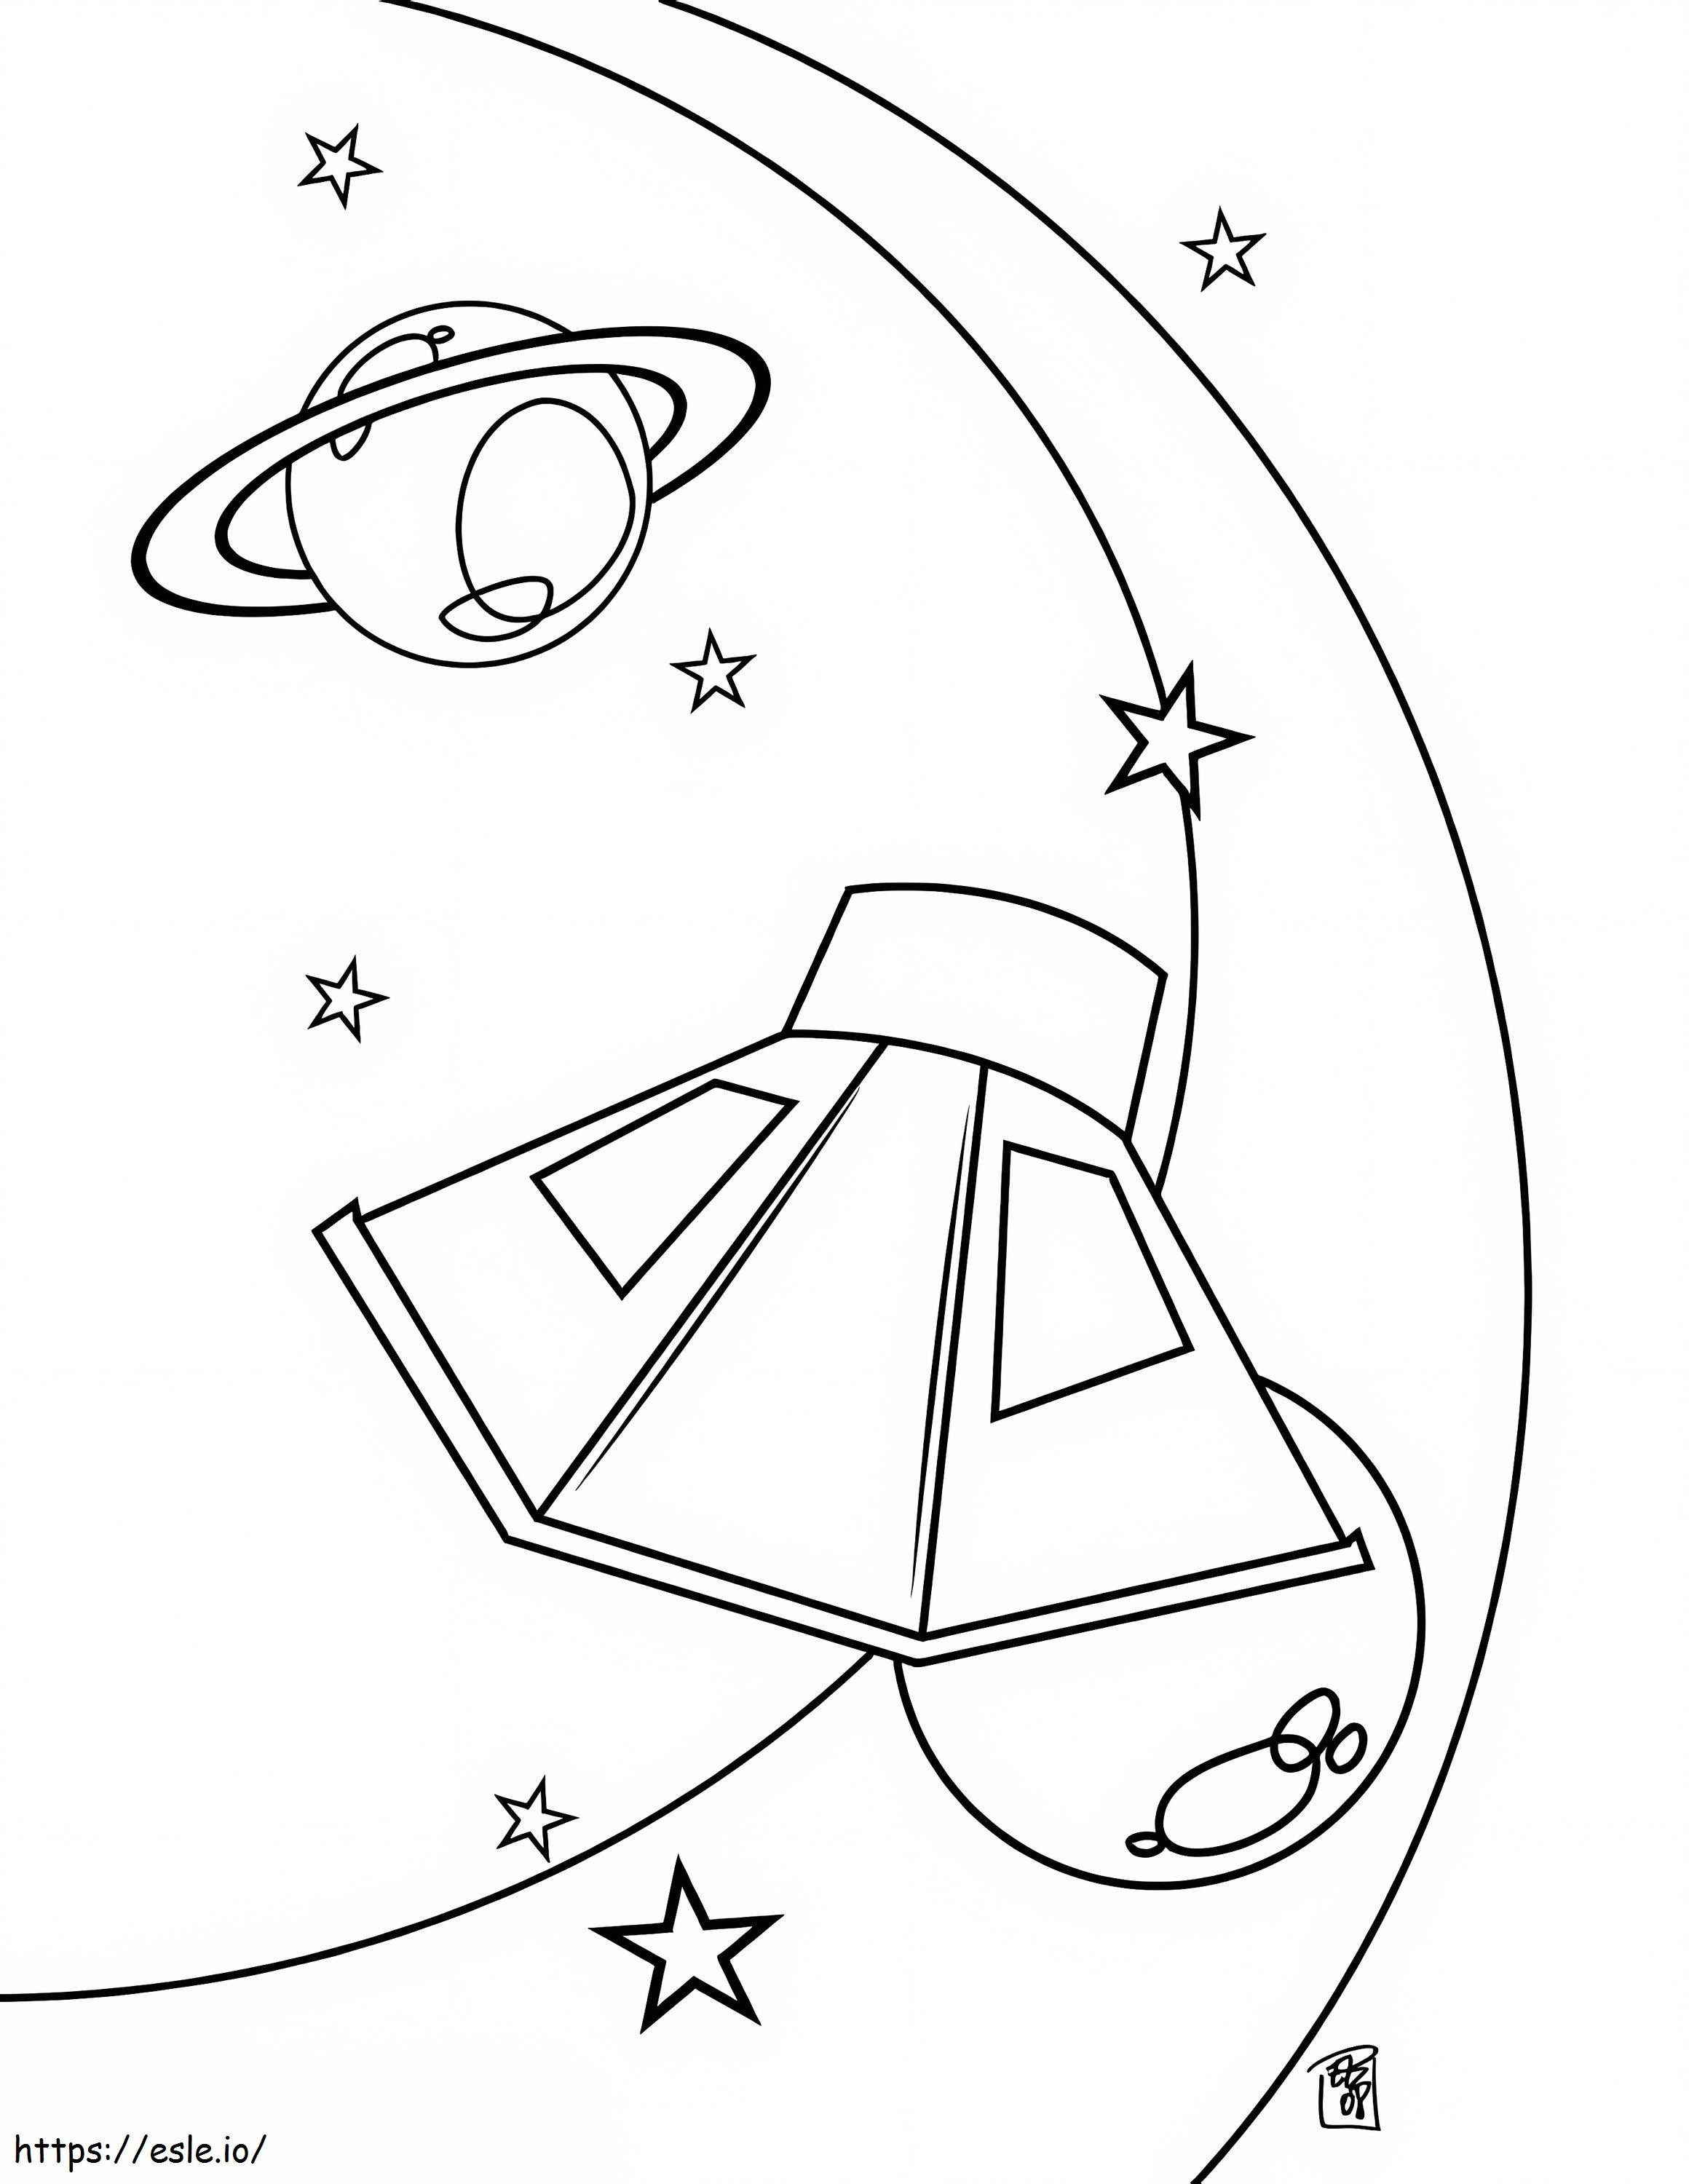 Ufo And Saturn coloring page